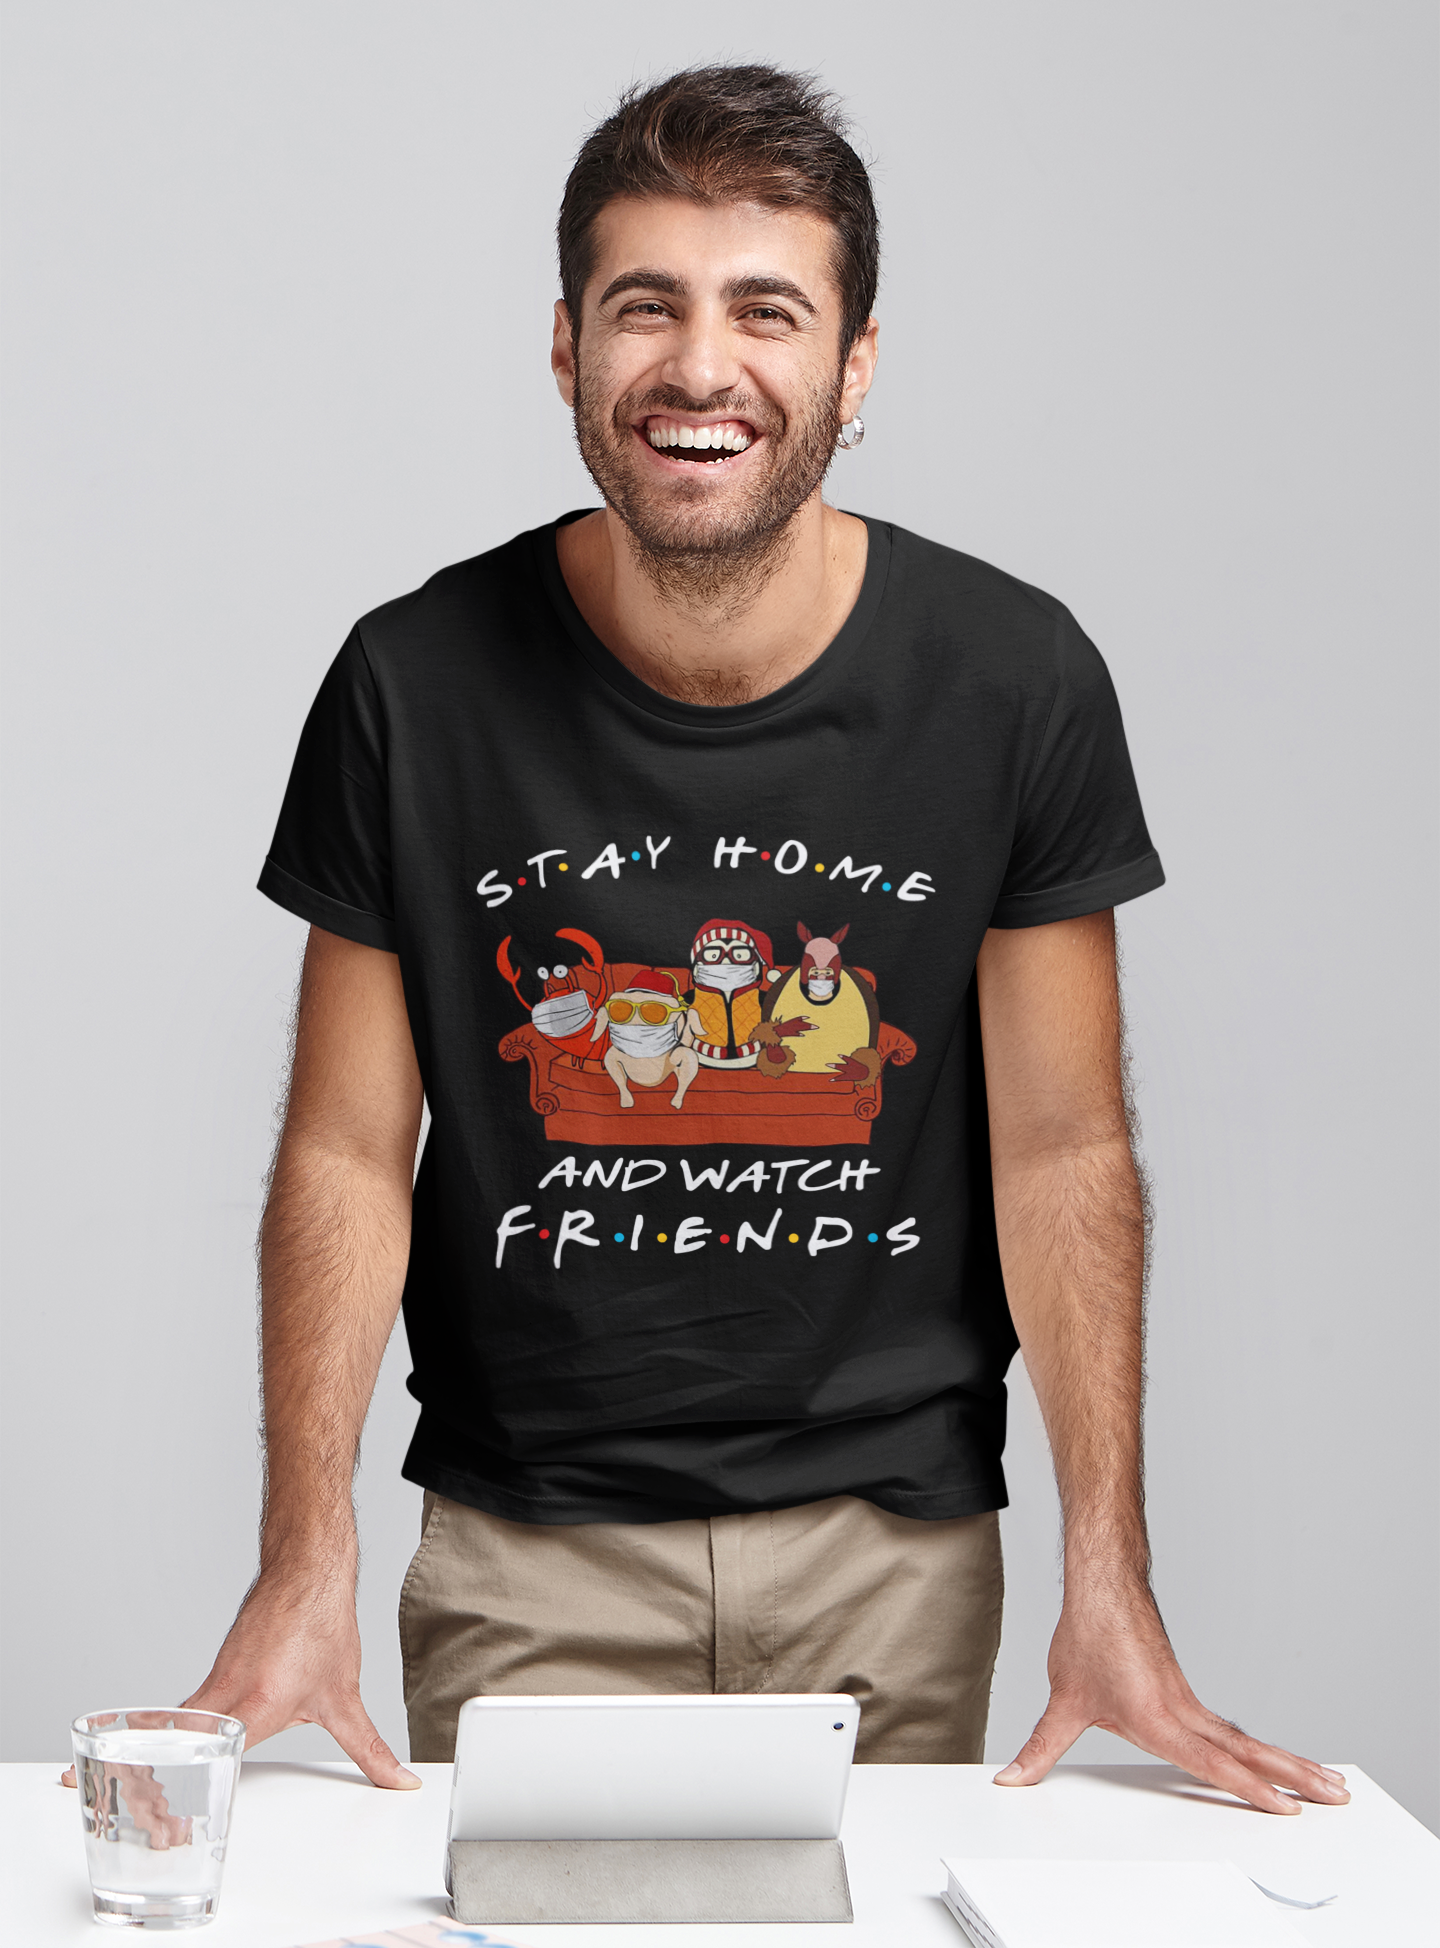 Friends TV Show T Shirt, Friends Shirt, Friends Characters Costumes T Shirt, Stay Home And Watch Friends Tshirt